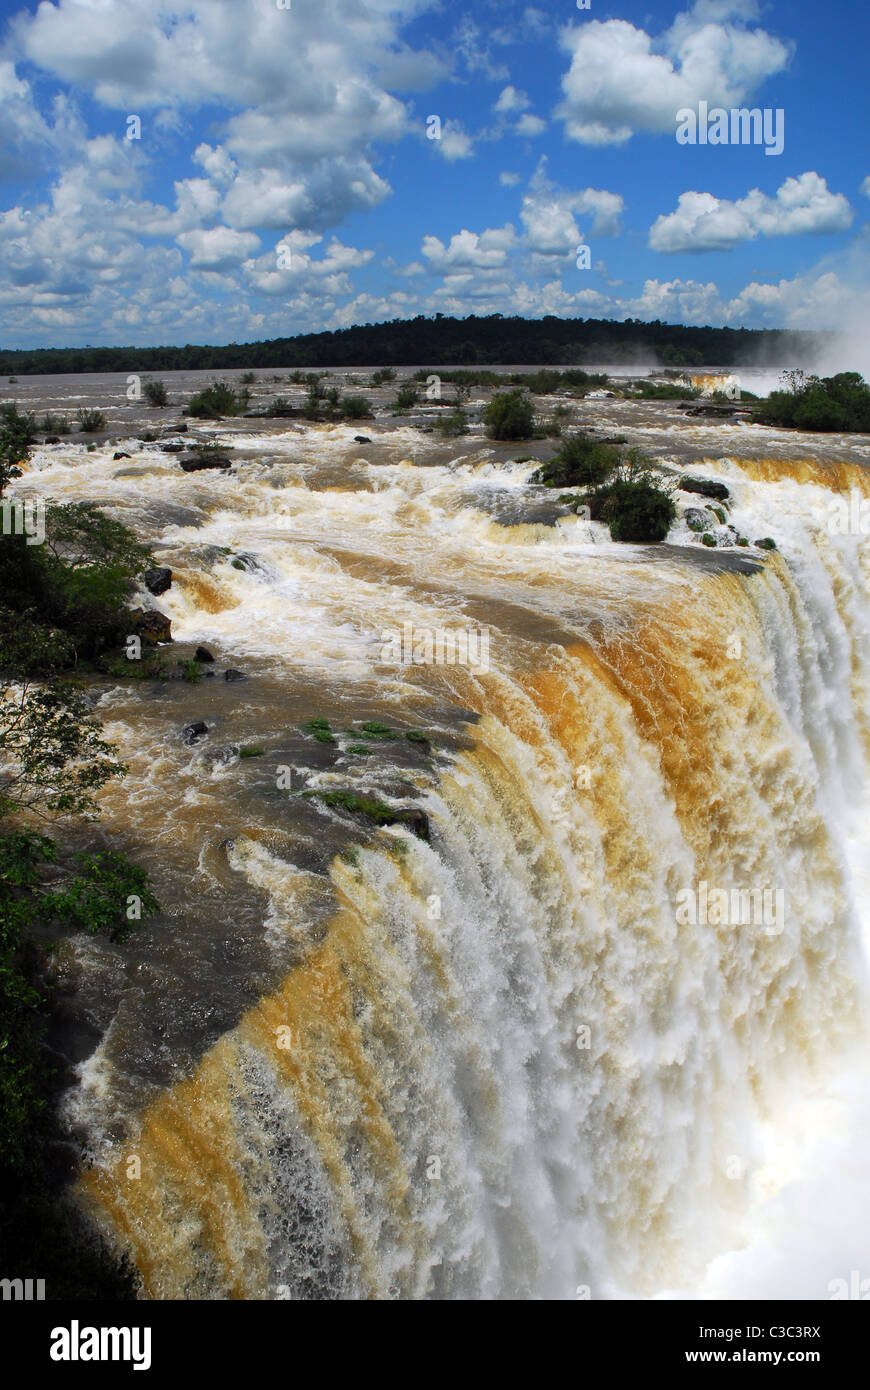 Iguacu falls on the border between Brazil and Argentina Stock Photo